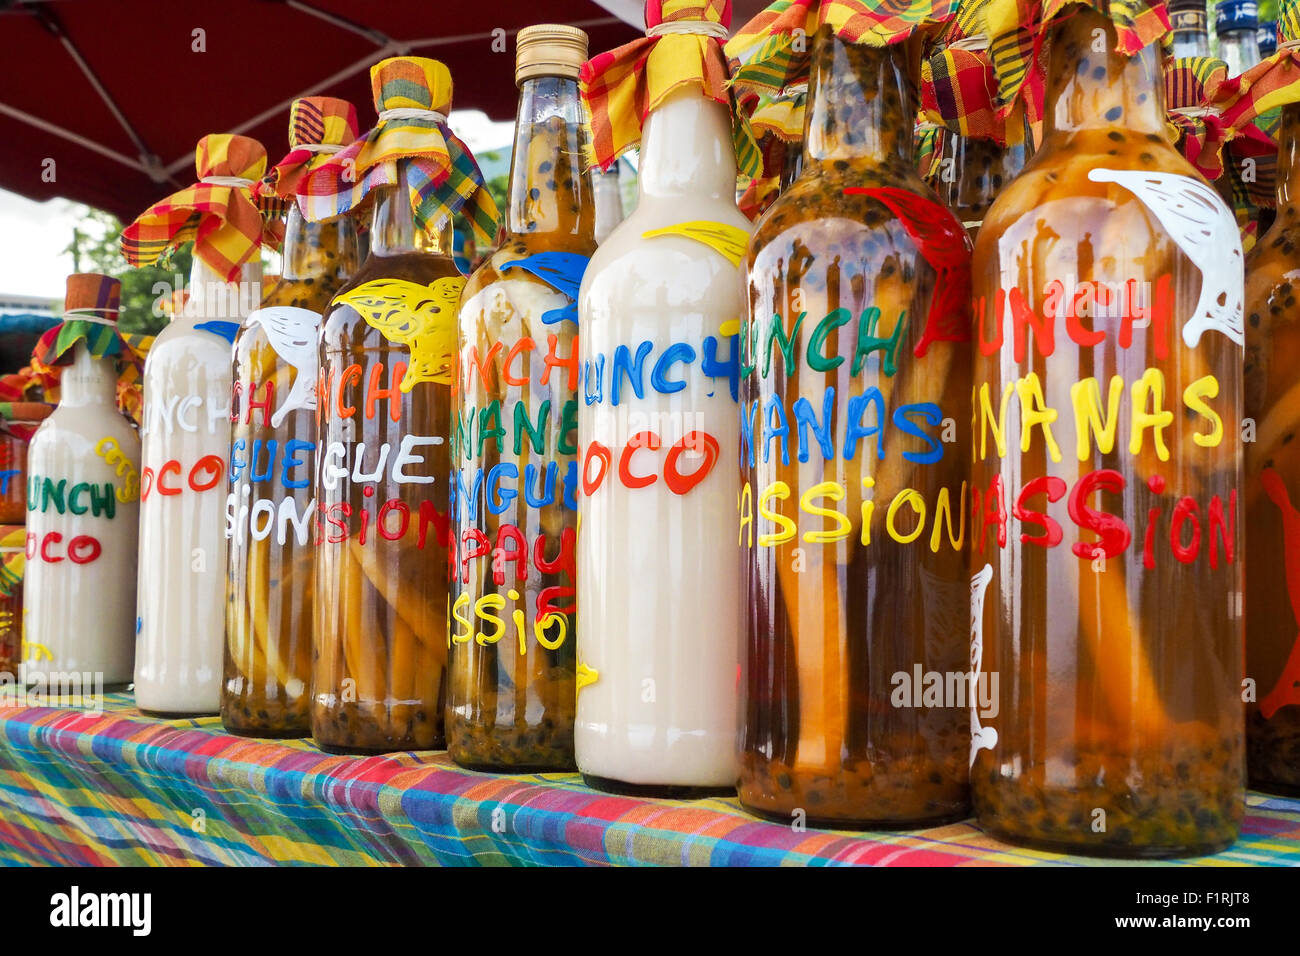 Traditional flavoured rhum bottles on the desk of a market stall in Sainte Anne, Guadeloupe Stock Photo